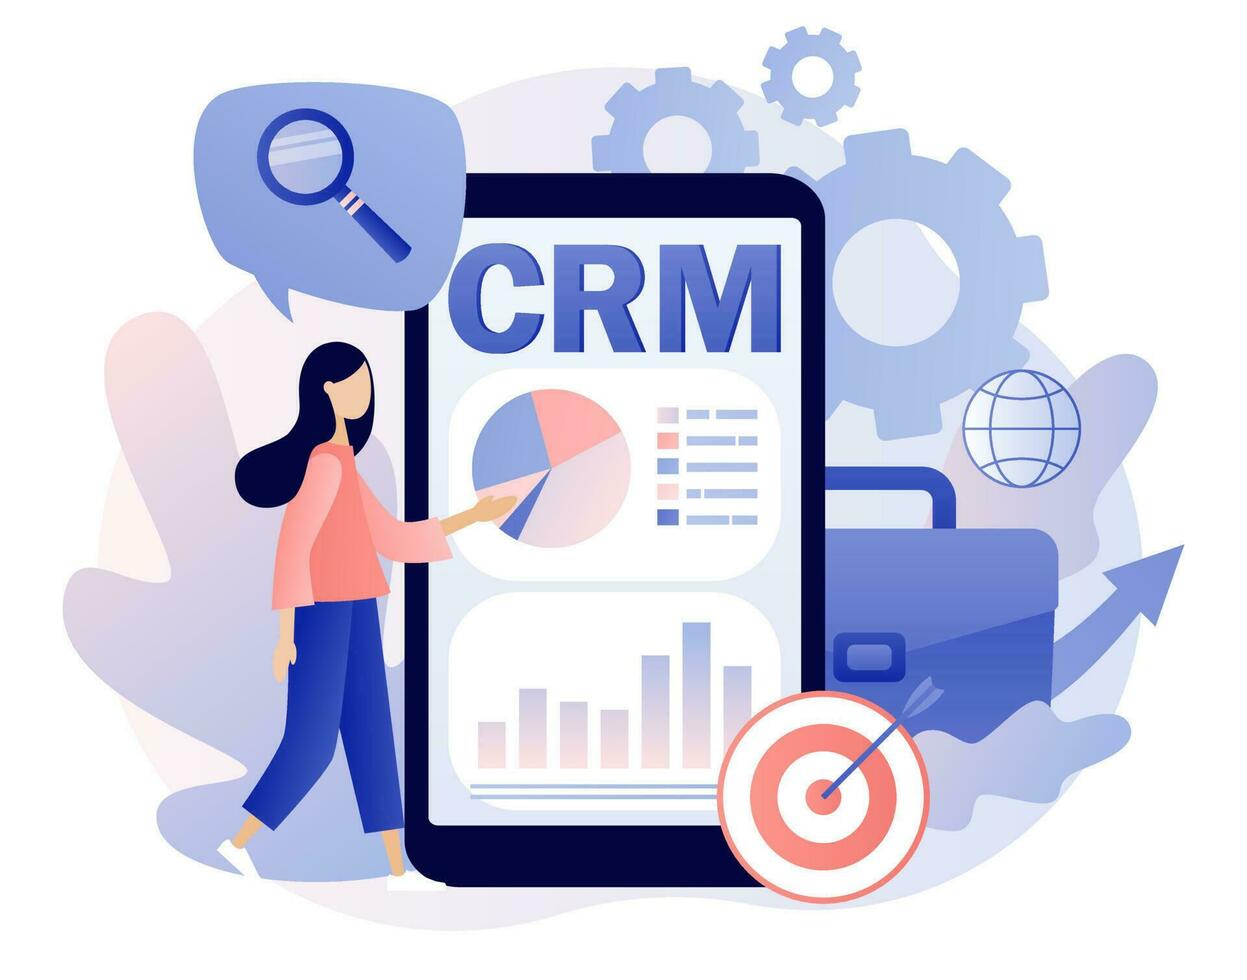 CRM solution in smartphone app. Customer relationship management concept. Business strategy. Tiny businessman perform data analysis. Modern flat cartoon style. Vector illustration on white background